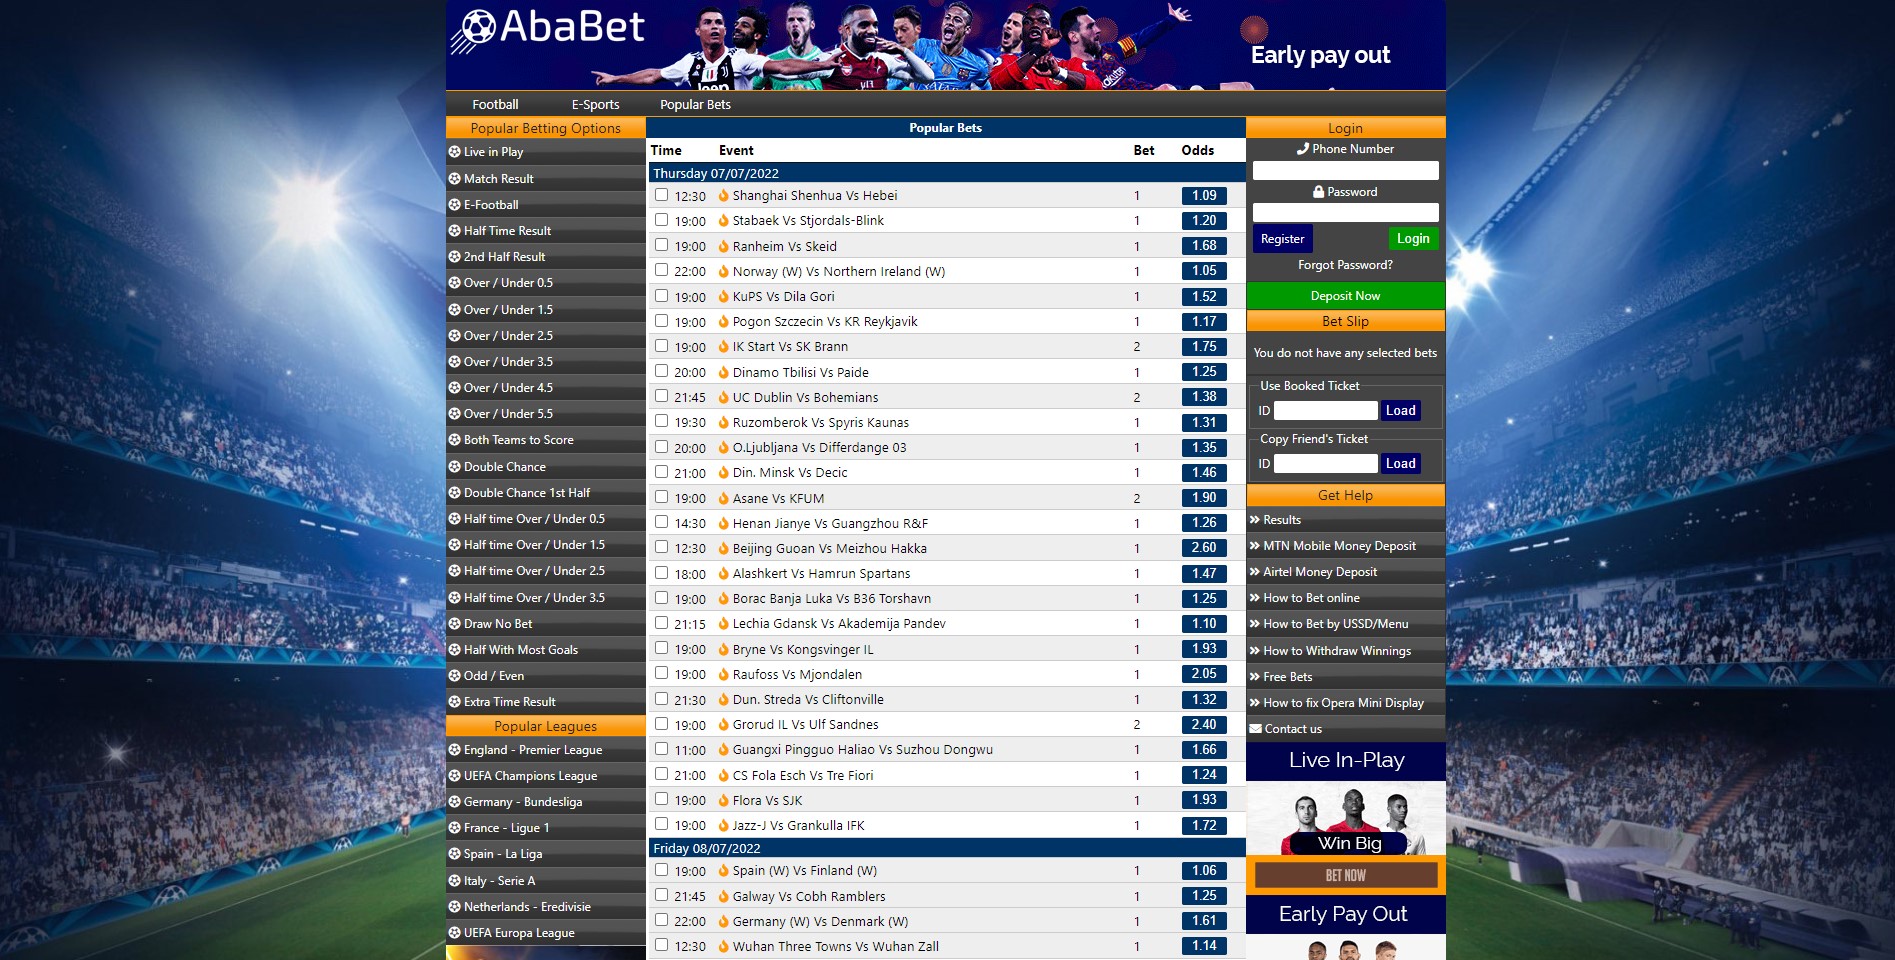 Ababet popular bets